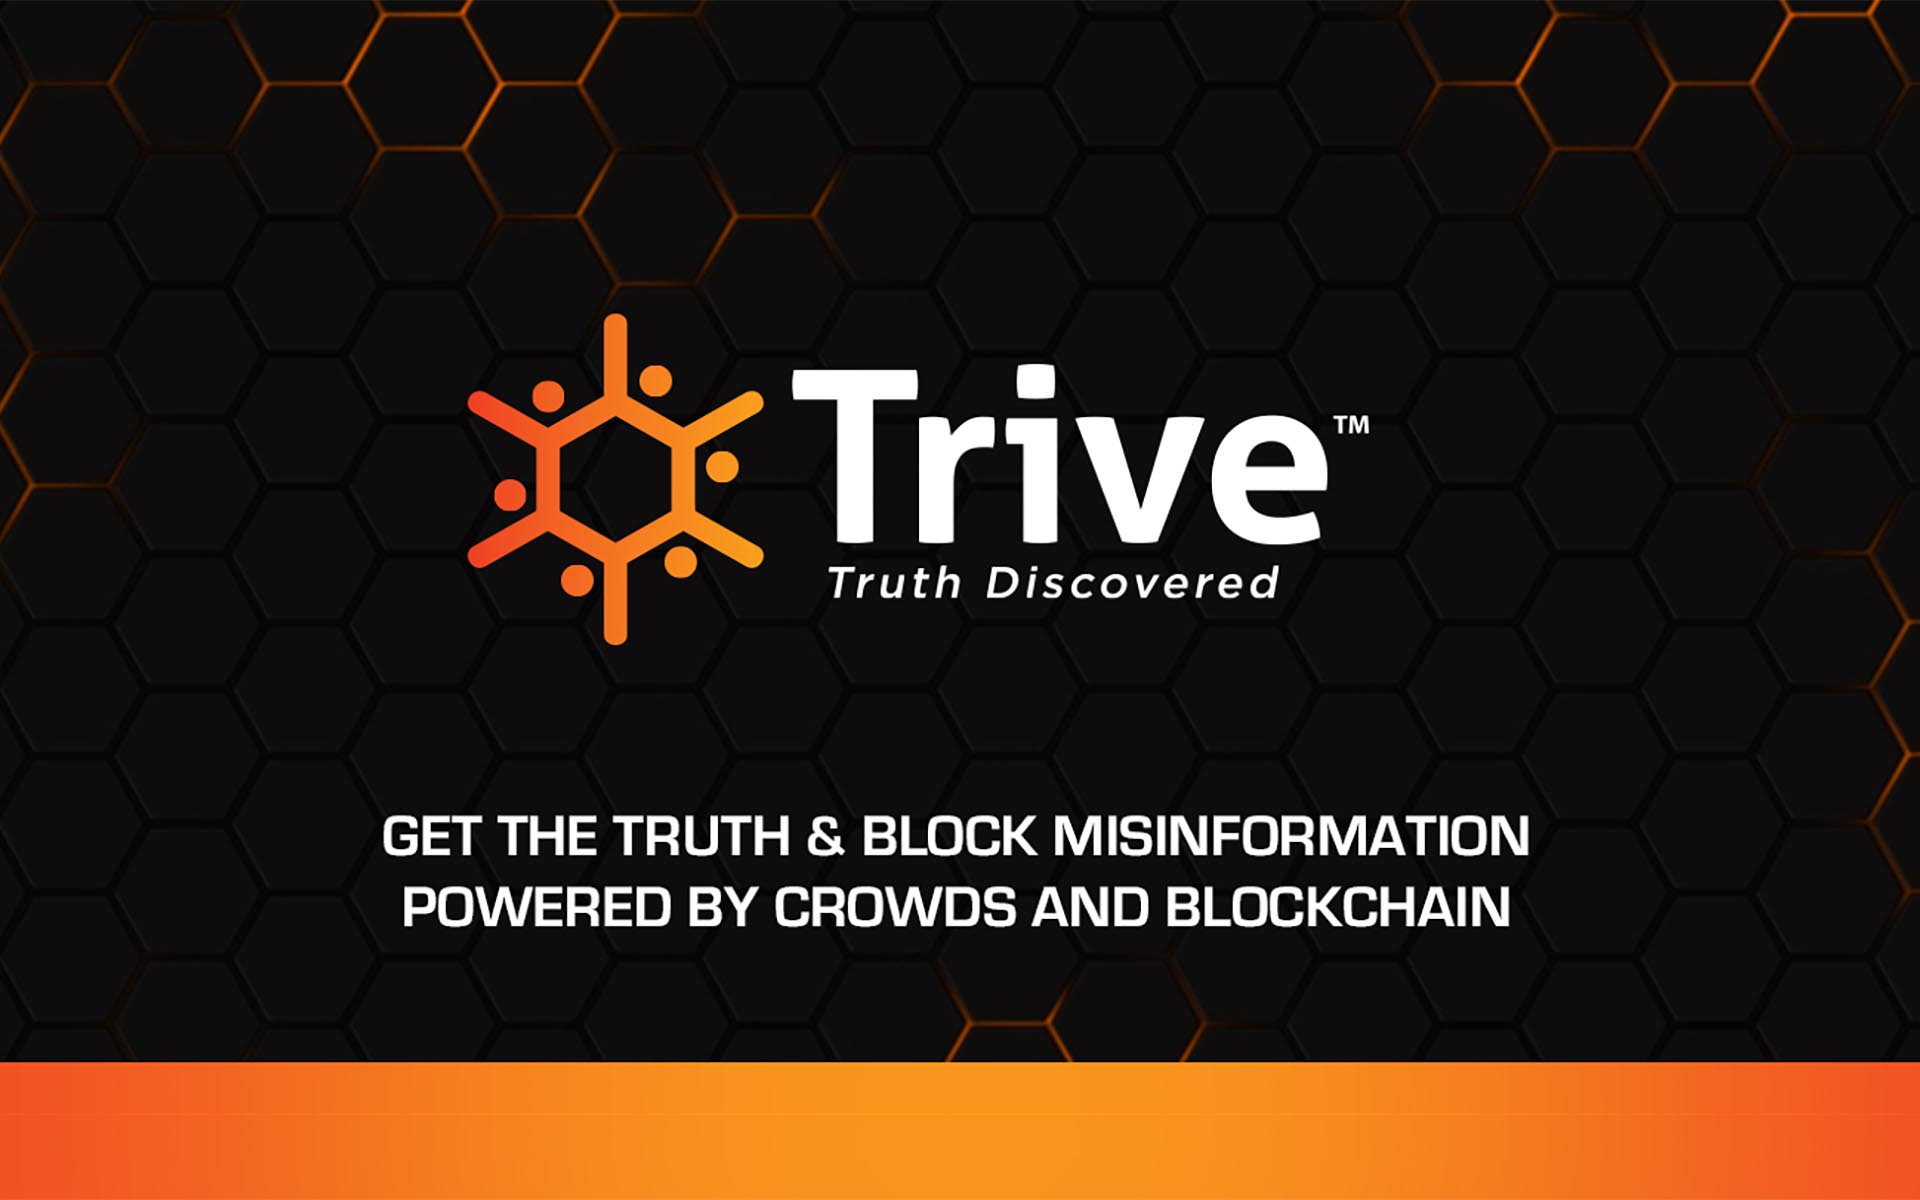 Live Pre-sale of Trive: Fights Fake News Using Cryptocurrency and Crowdsourced Research